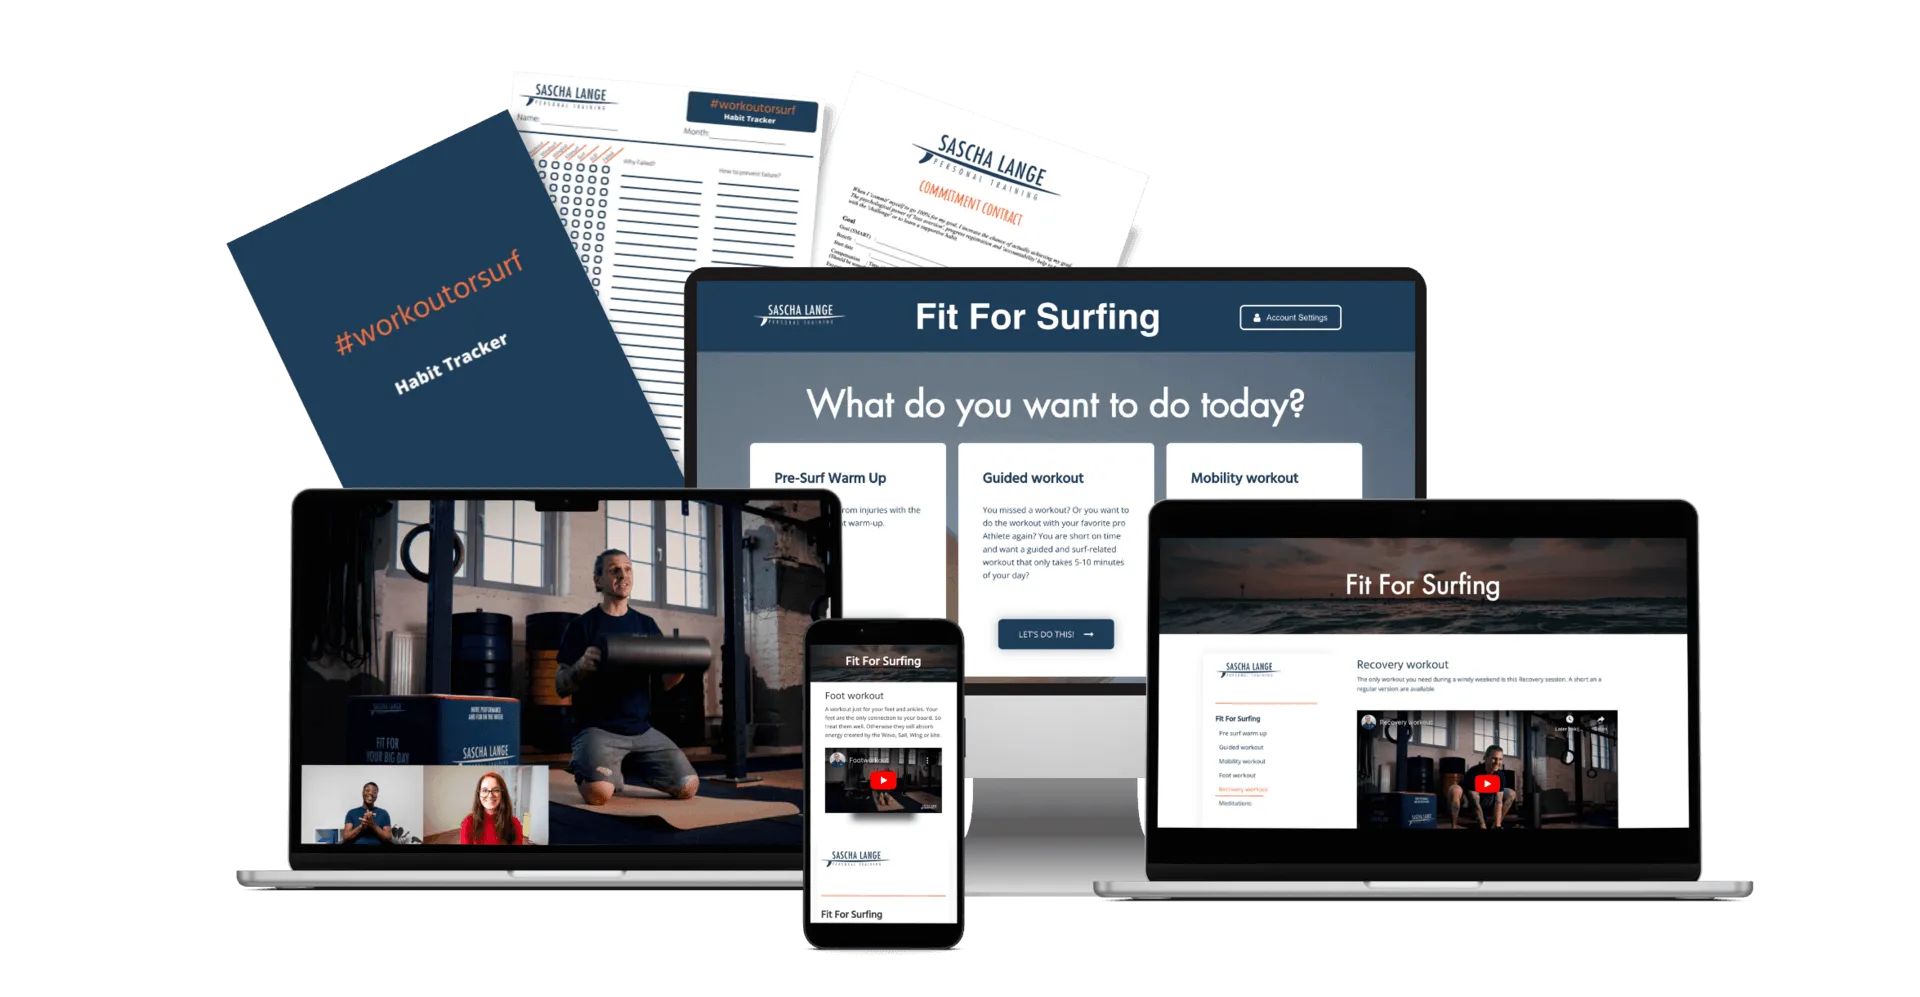 Fit For Surfing yearly subscription